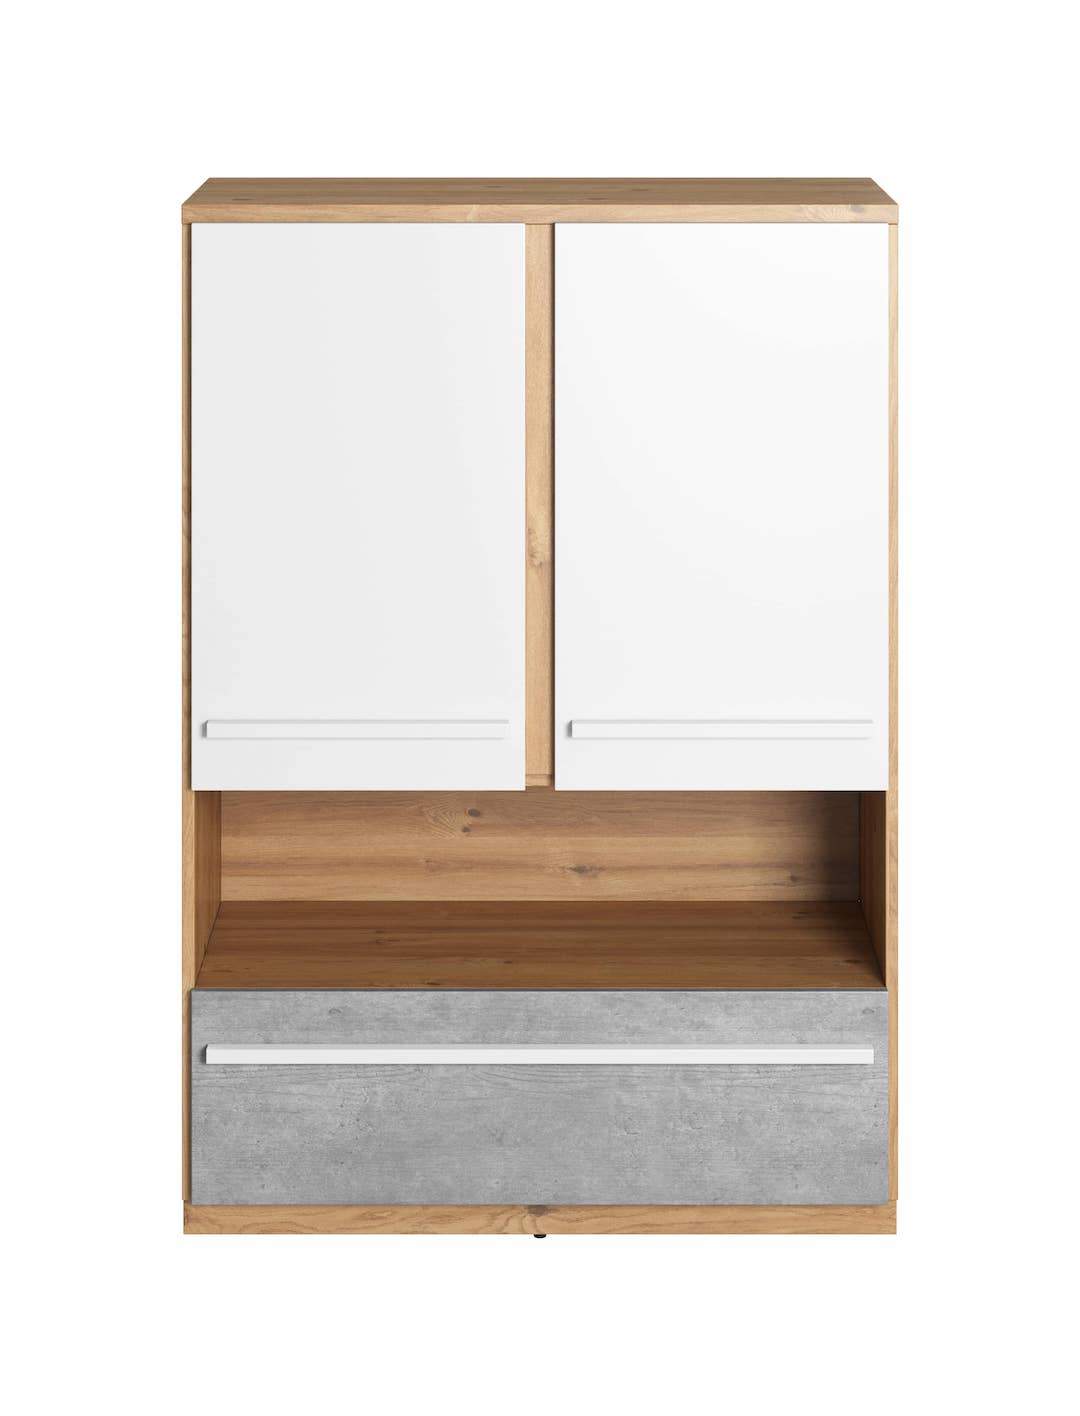 View Plano PN04 Sideboard Cabinet information